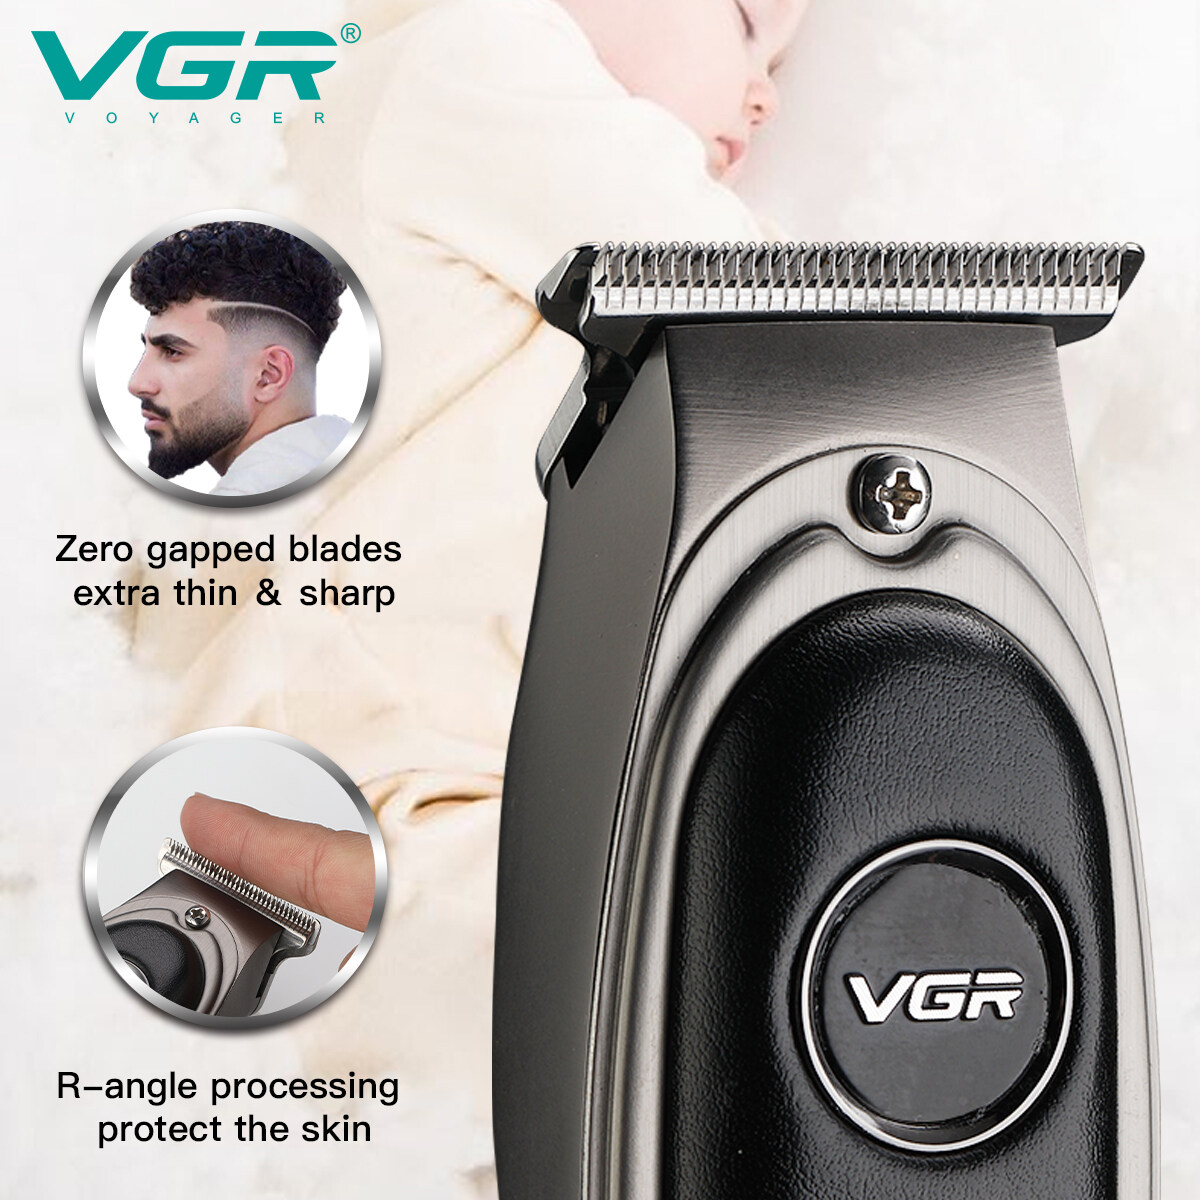 hair trimmer suppliers, customized hair trimmer, china hair trimmer manufacturer, hair clipper suppliers, wholesale leather material trimmer